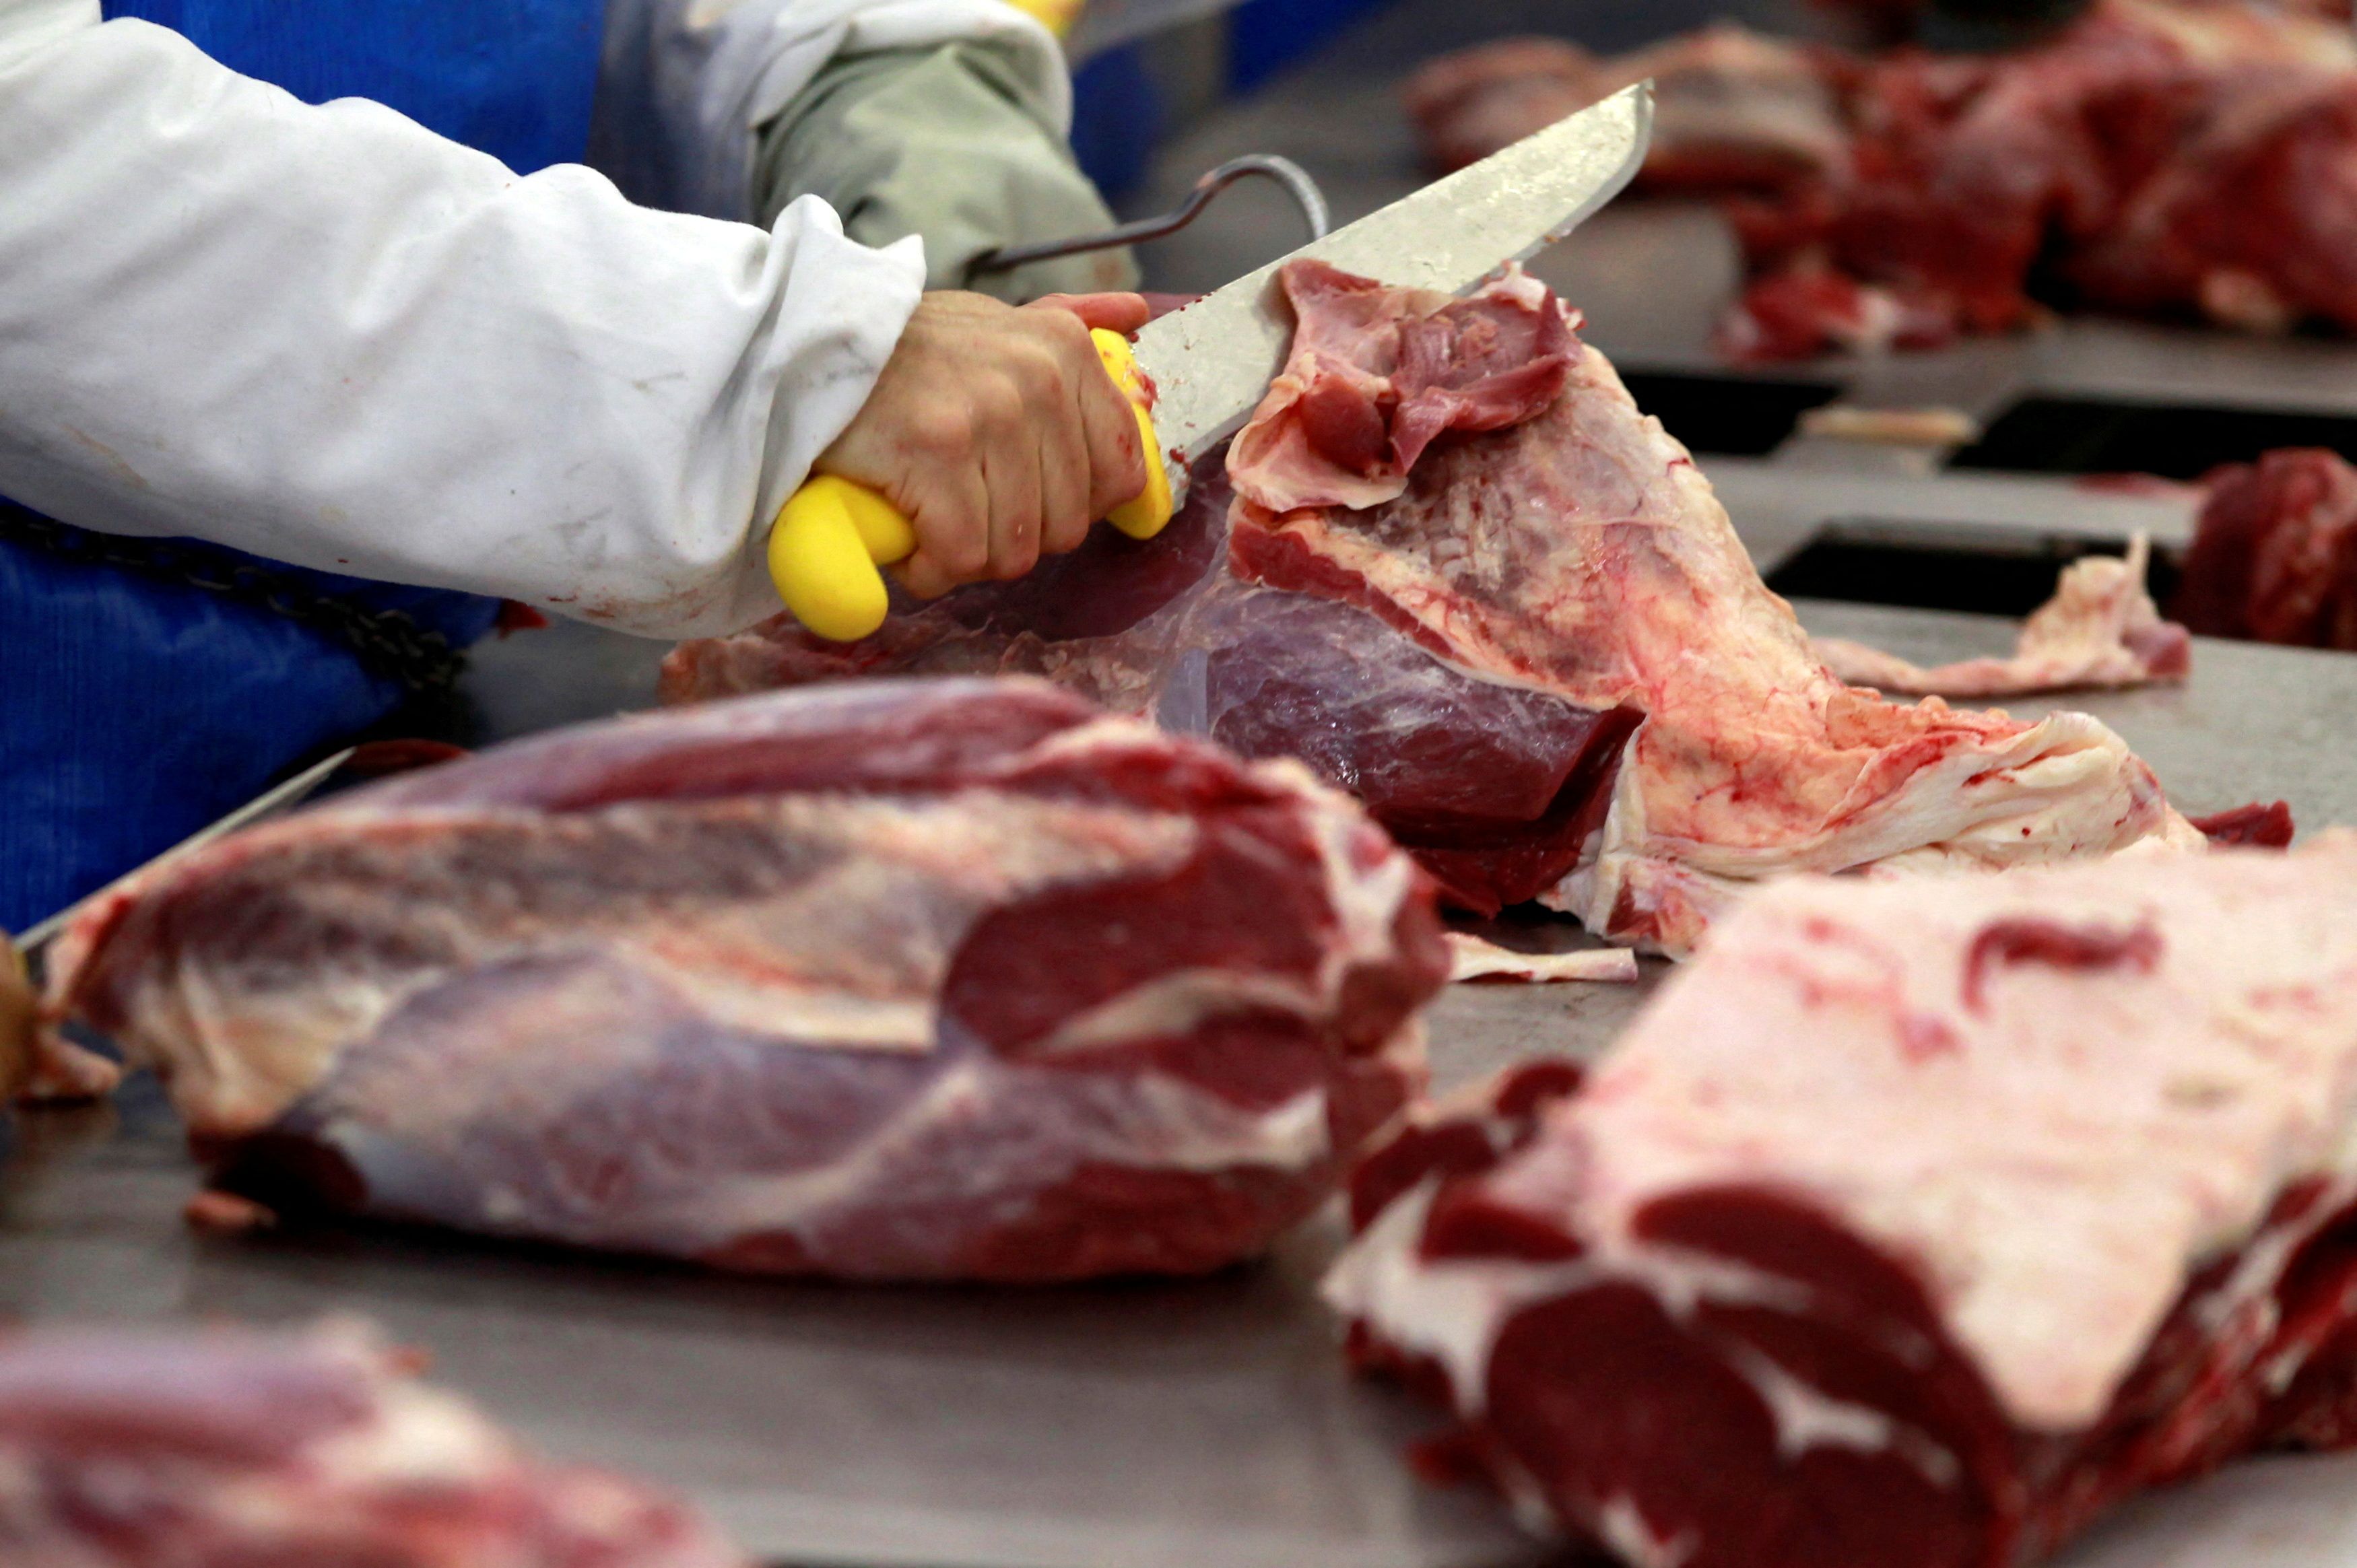 A worker cuts up joints of beef at the Marfrig Group slaughterhouse in Promissao